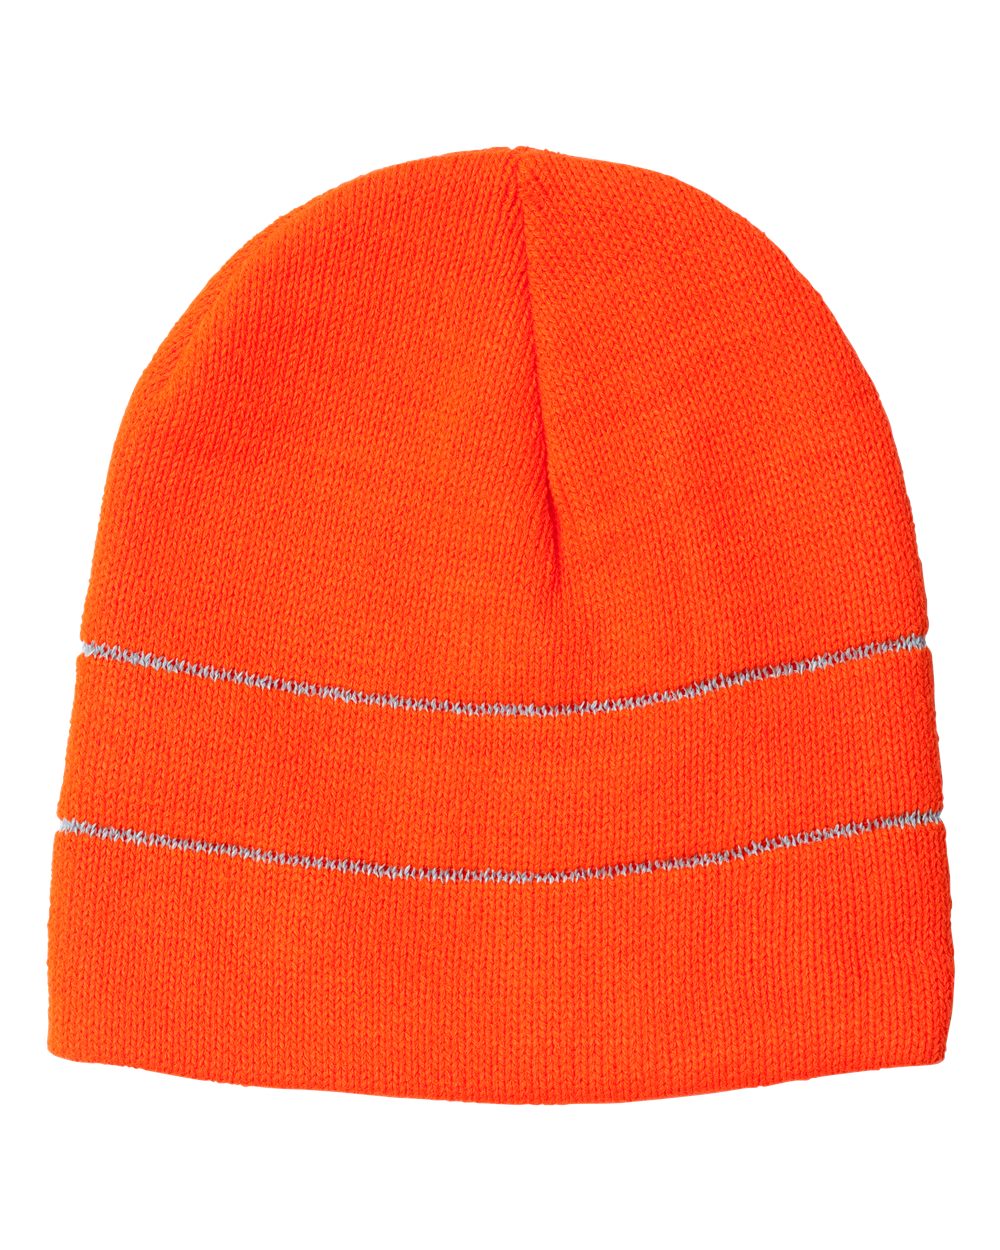 USA-Made Safety Knit Beanie with 3M Reflective Thread - 3715-